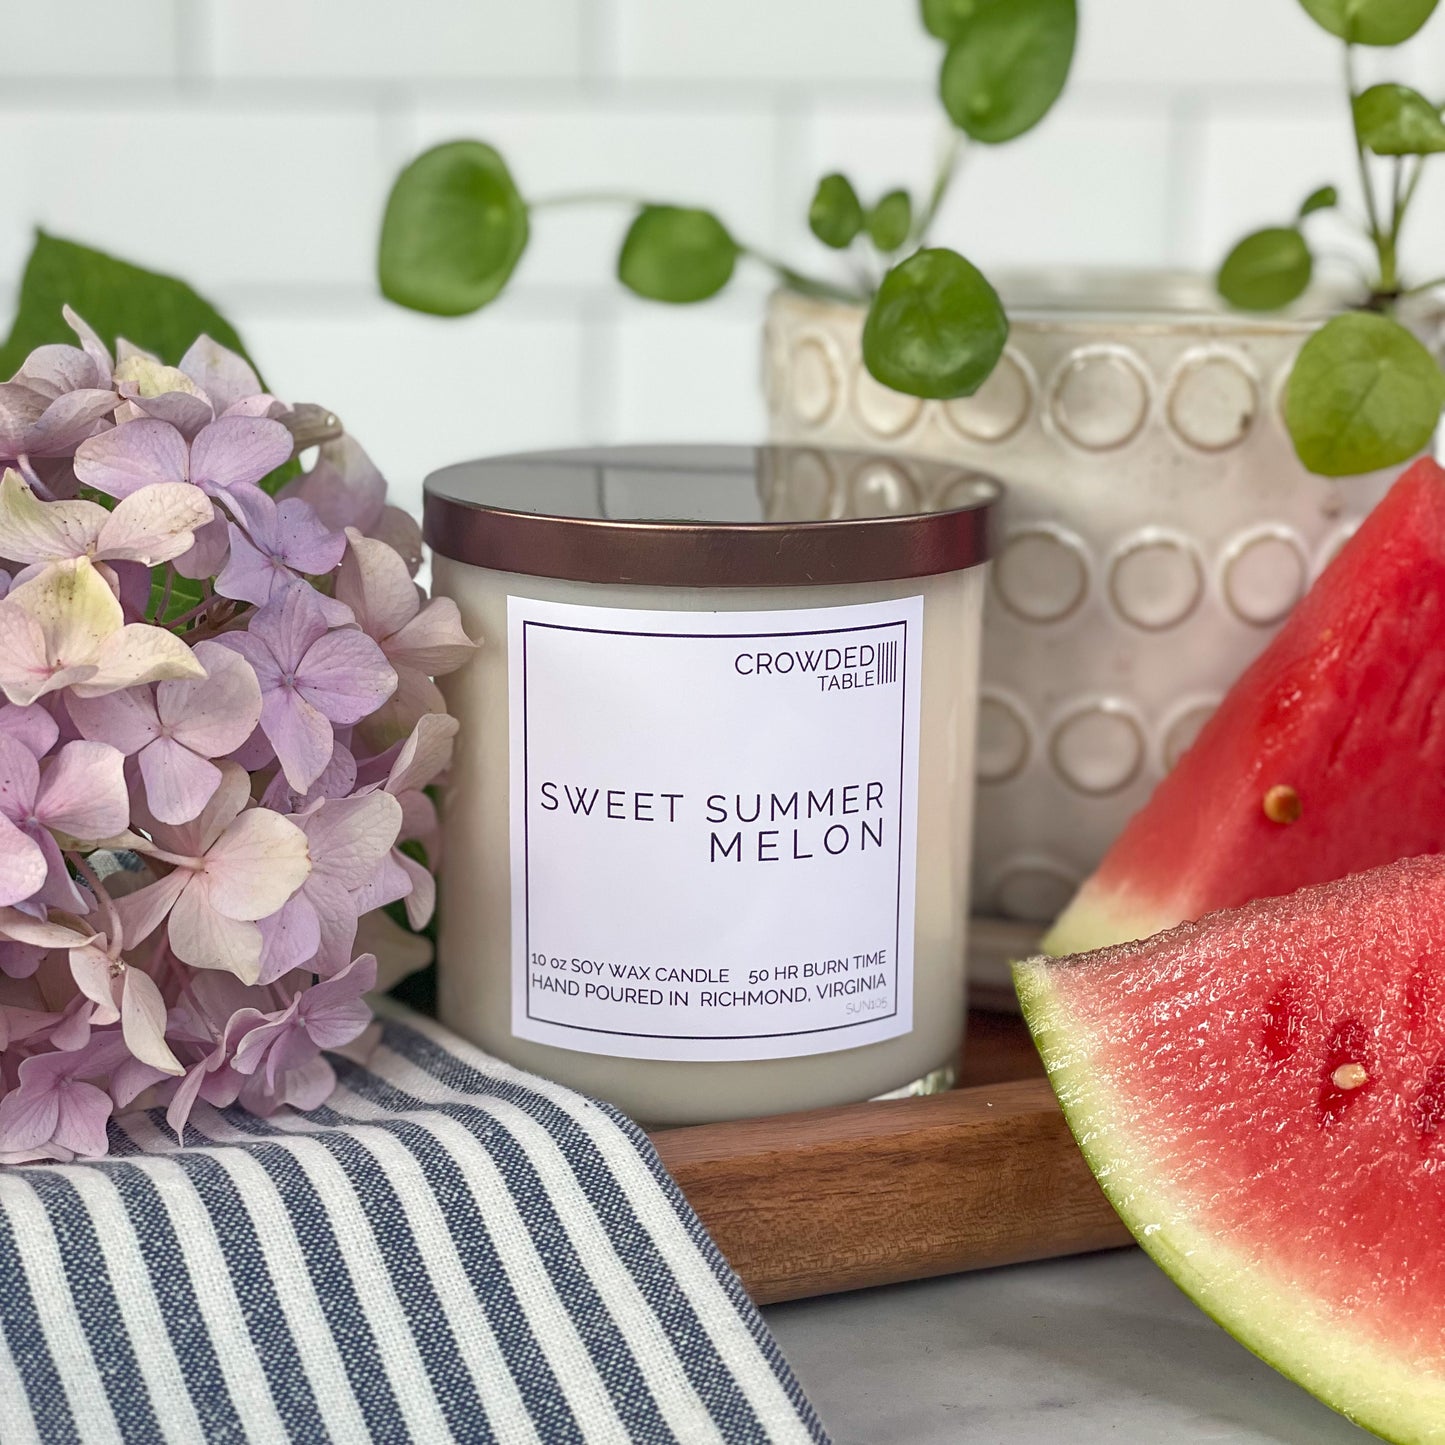 Sweet Summer Melon 10 oz. Pure Soy Wax Candle